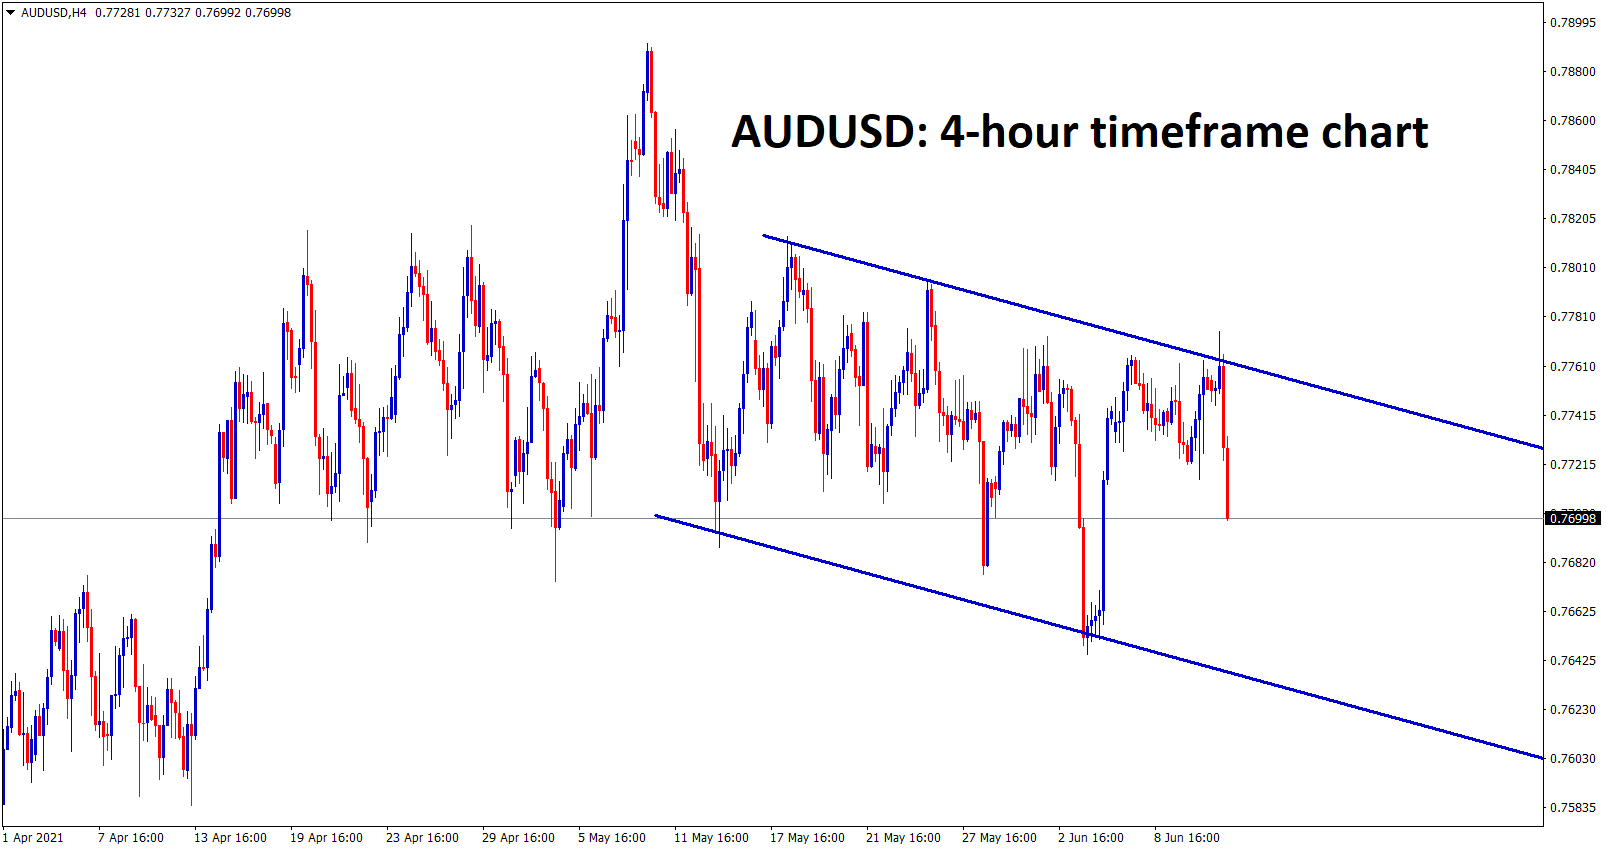 AUDUSD is ranging up and down between the specific prices